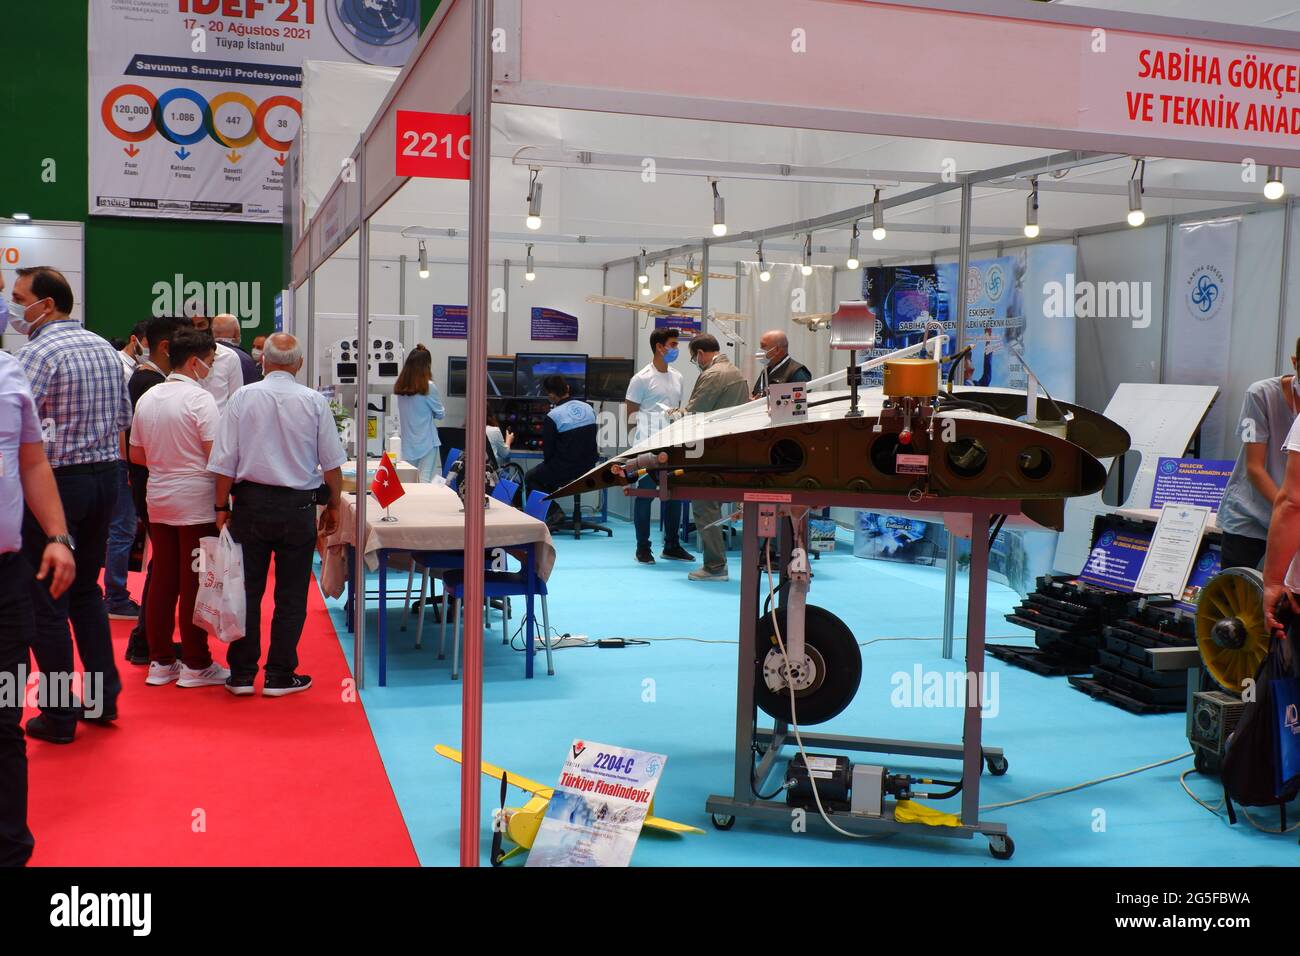 Plane wing cut view and other instruments at technology fair indoor with visitors Stock Photo